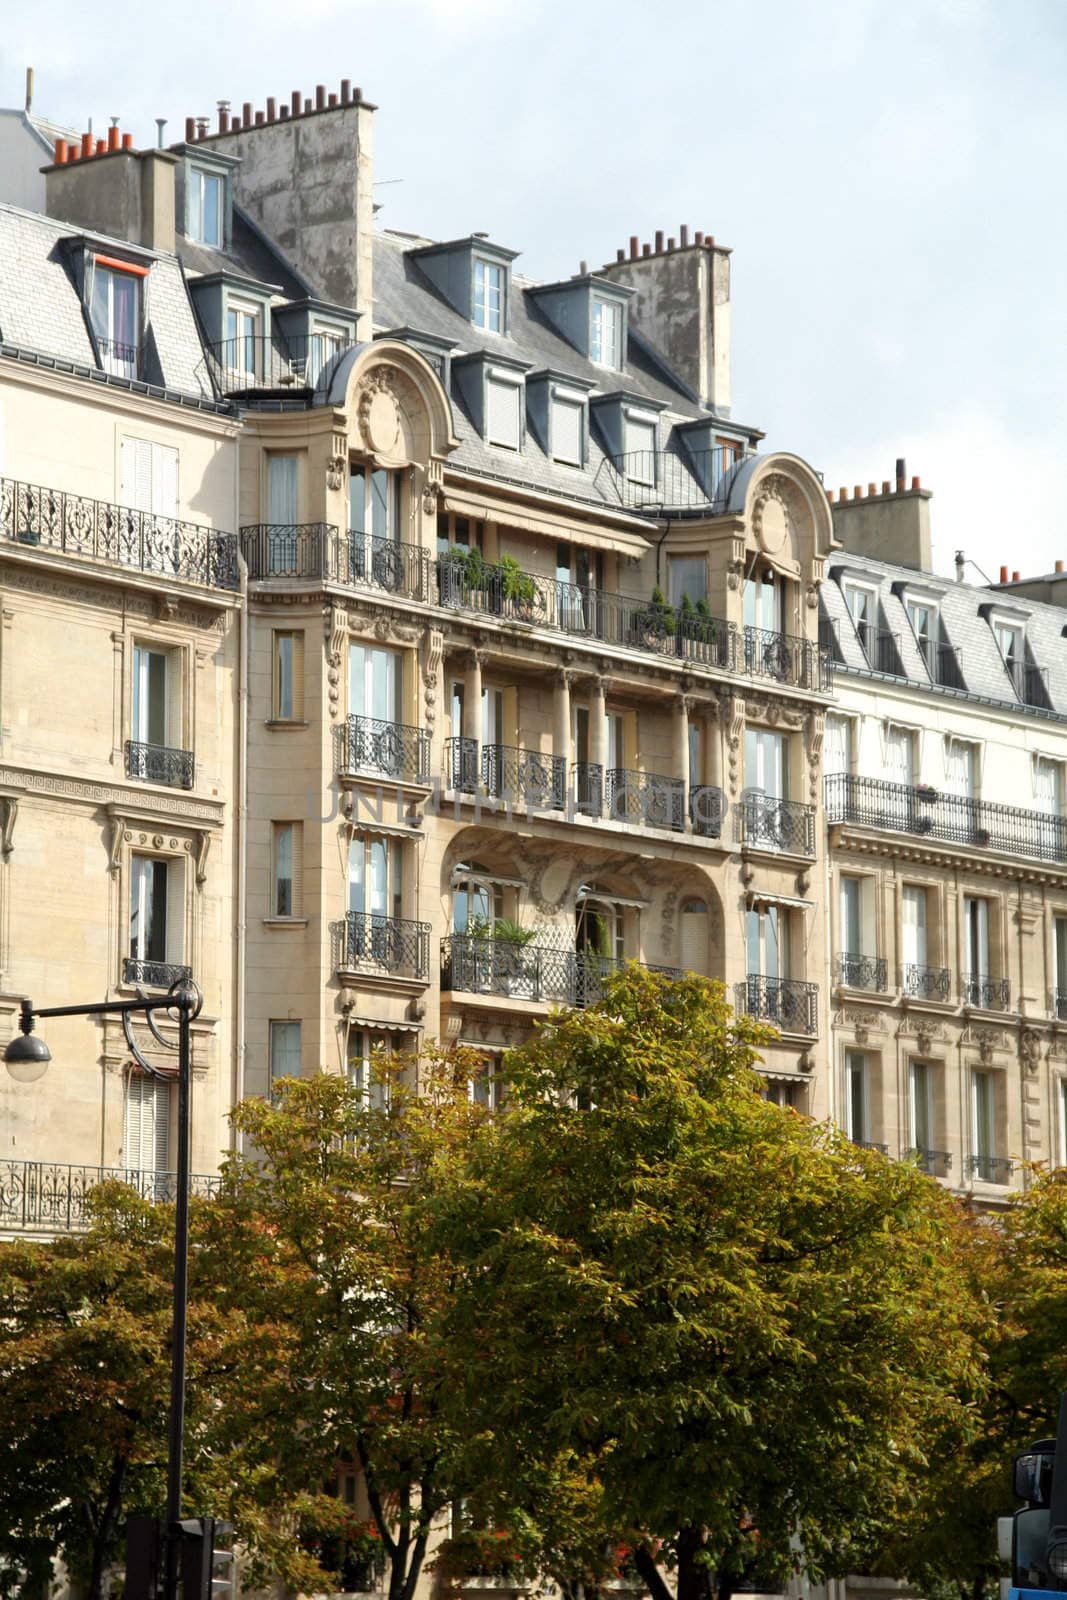 Houses on the streets of the capital of France - Paris. Trokadero.